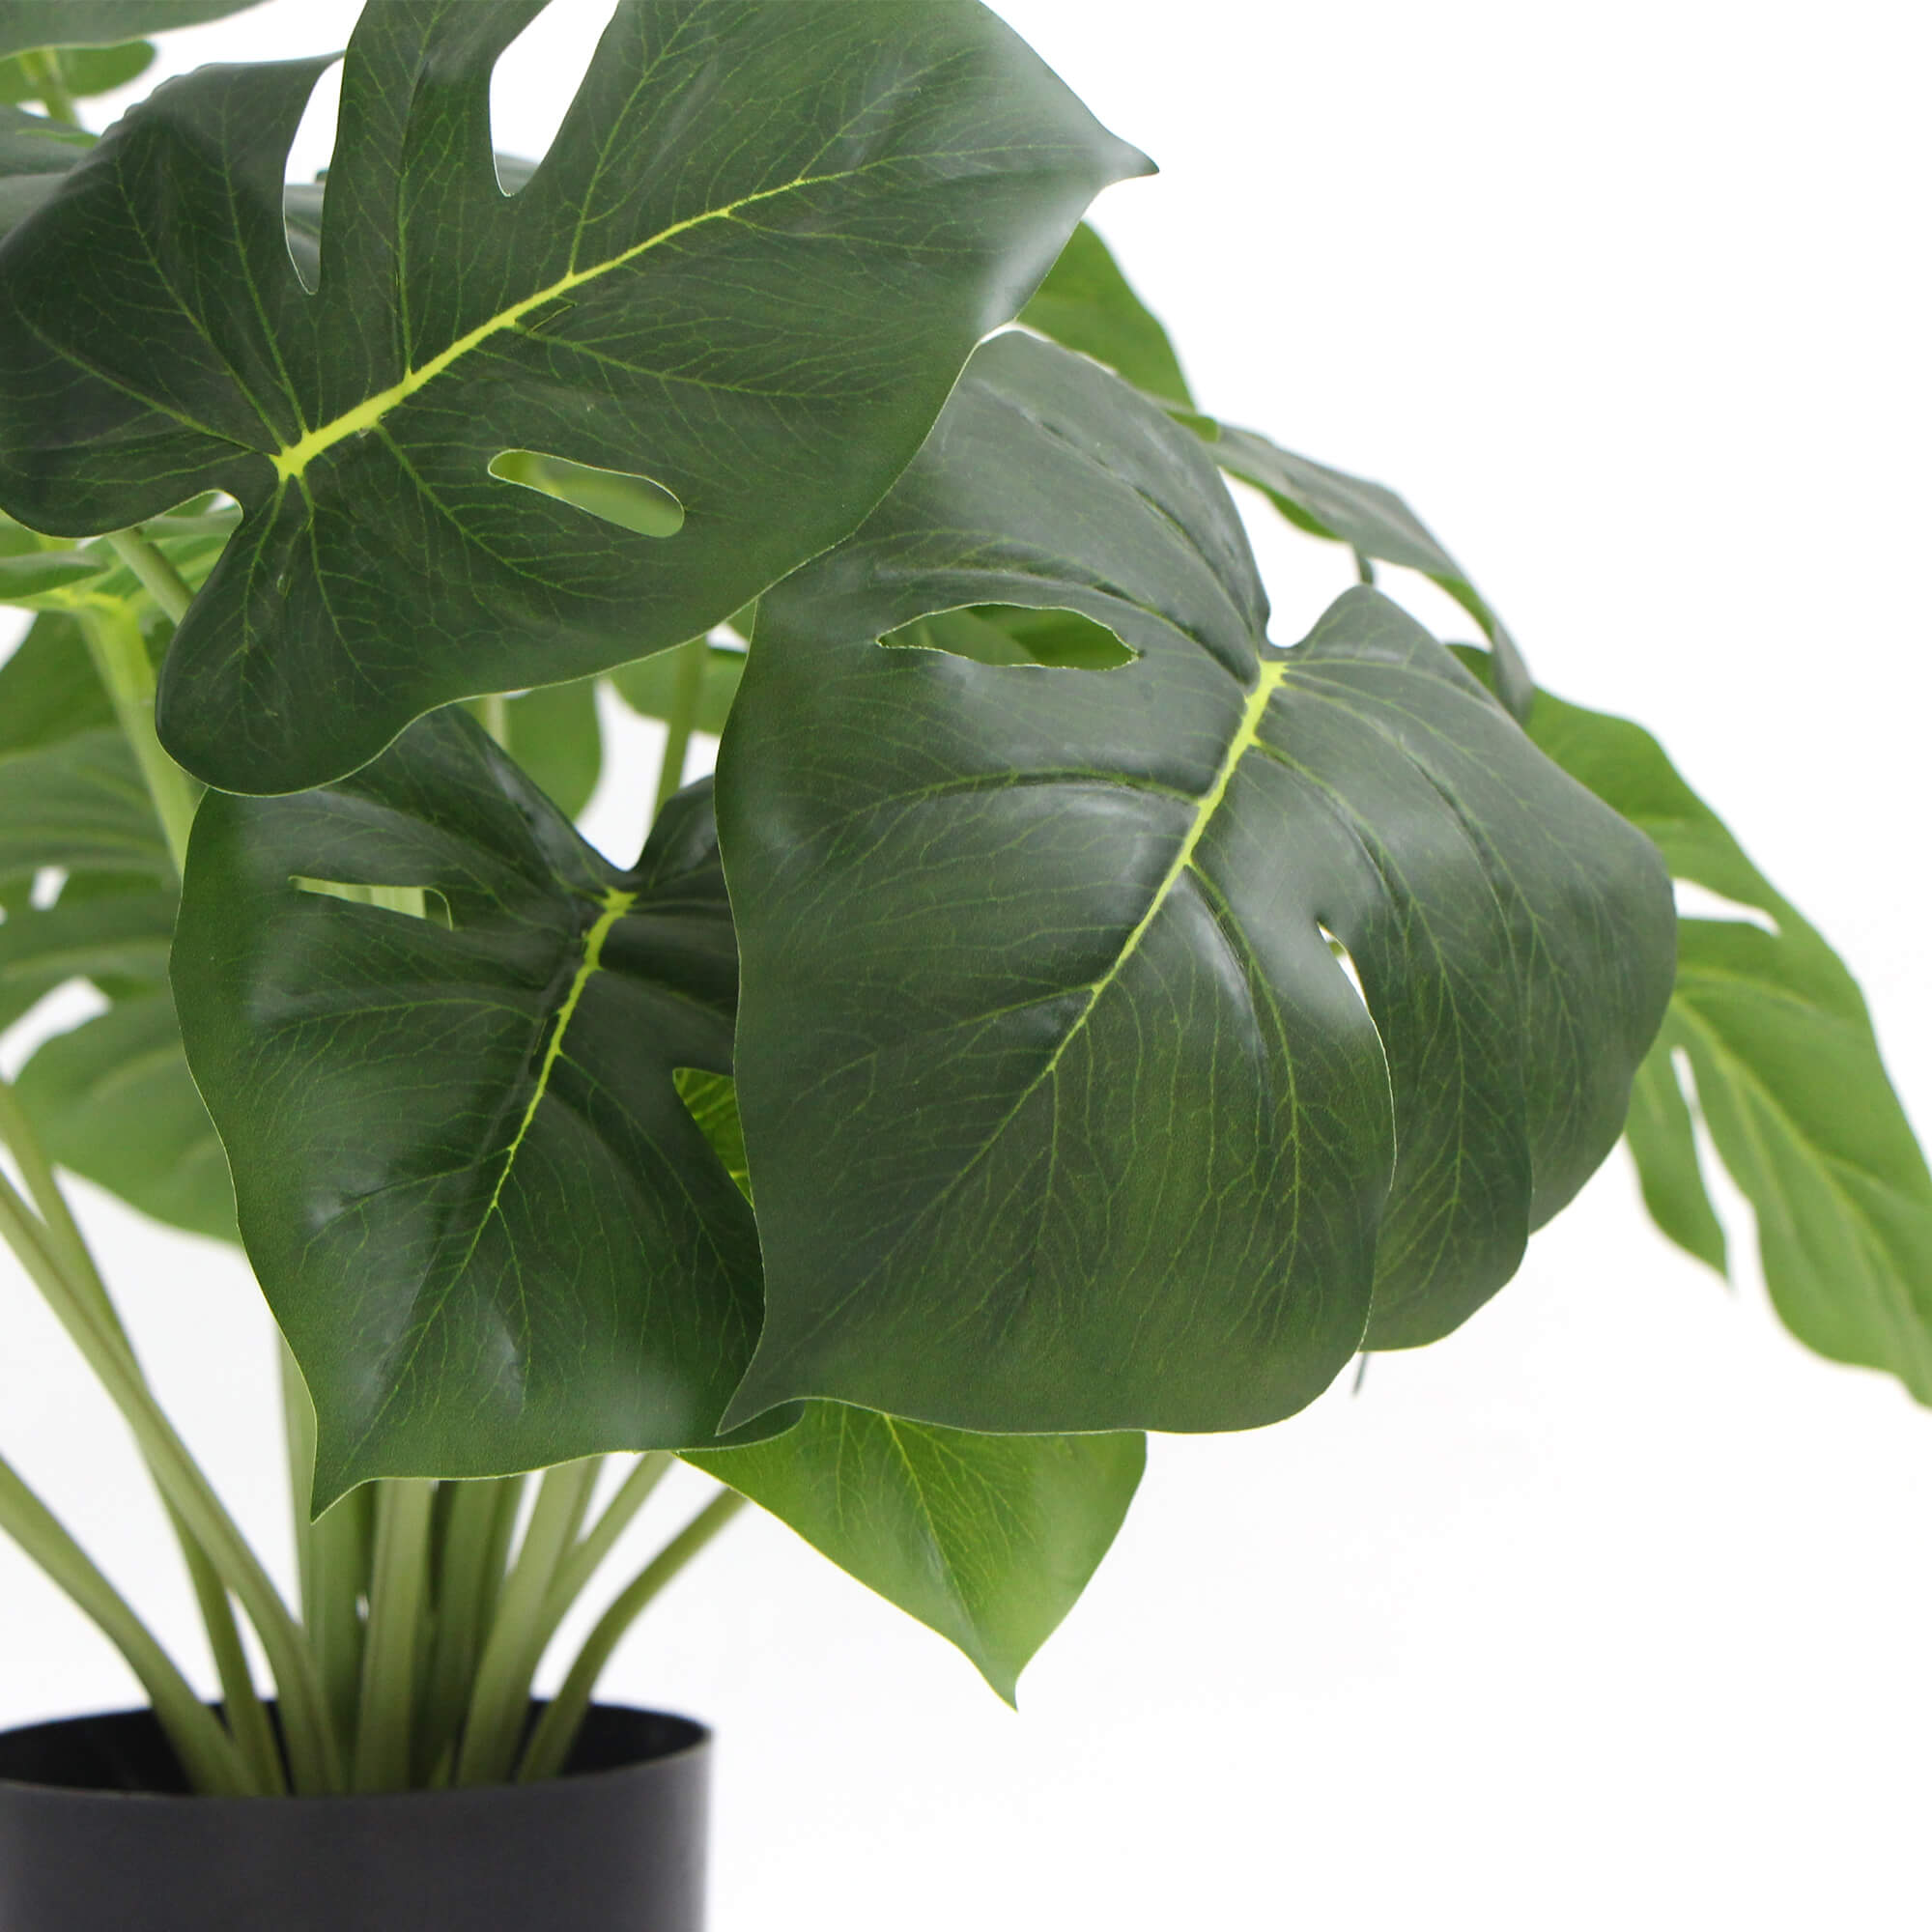 dense-potted-artificial-split-philodendron-plant-with-real-touch-leaves-50cm